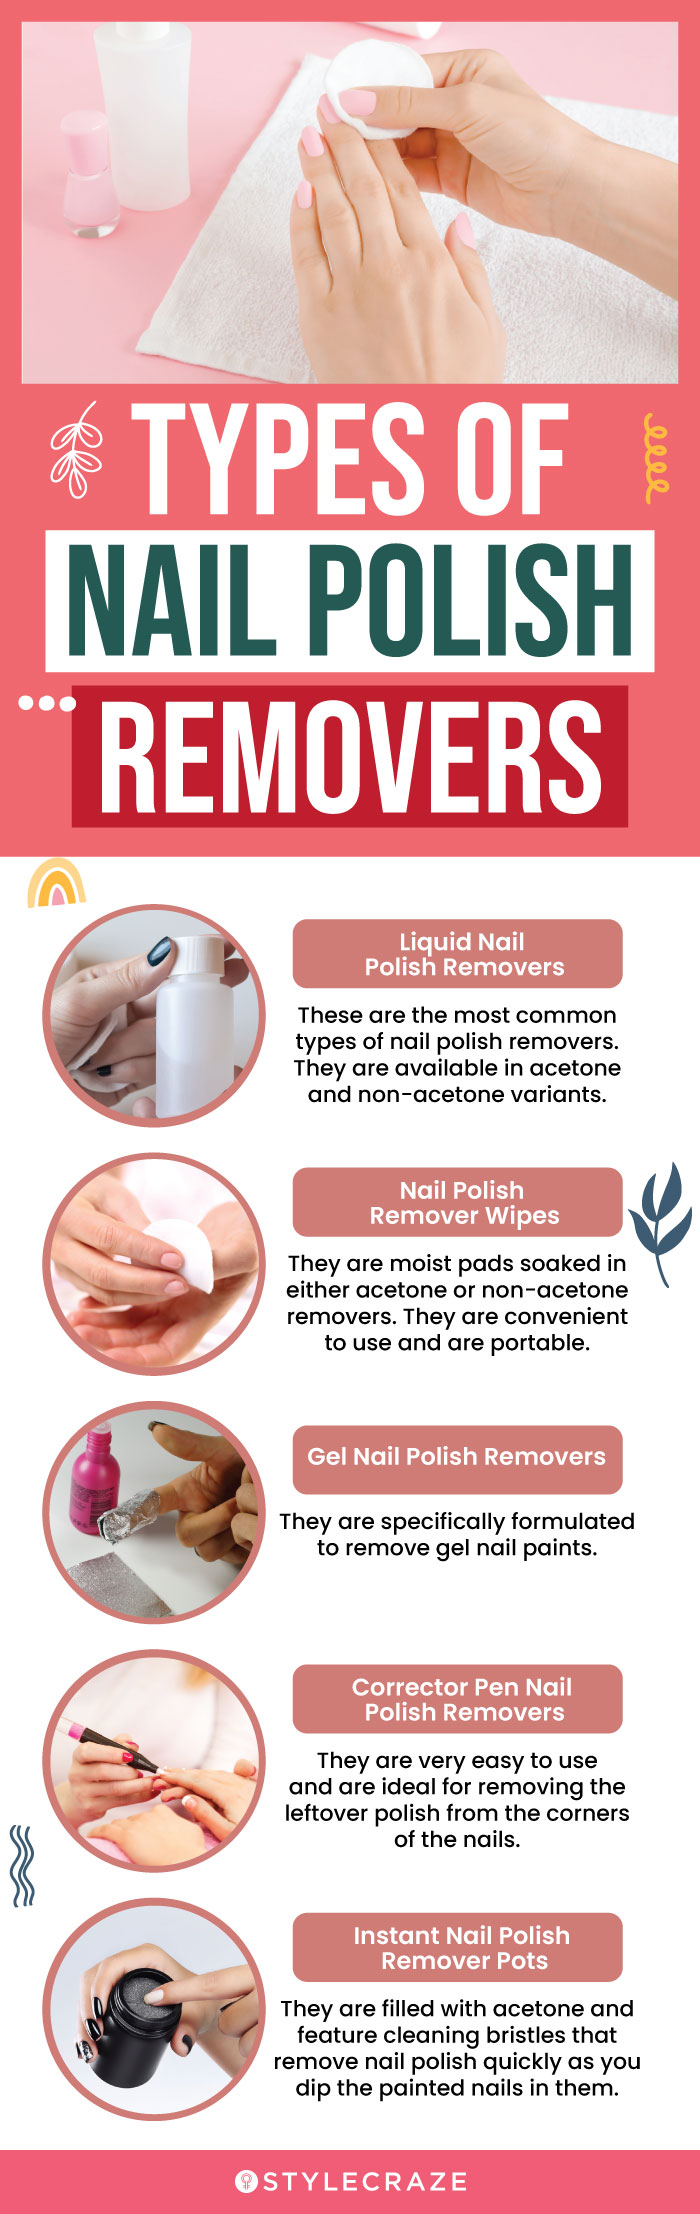 Types of Nail Polish Removers (infographic)